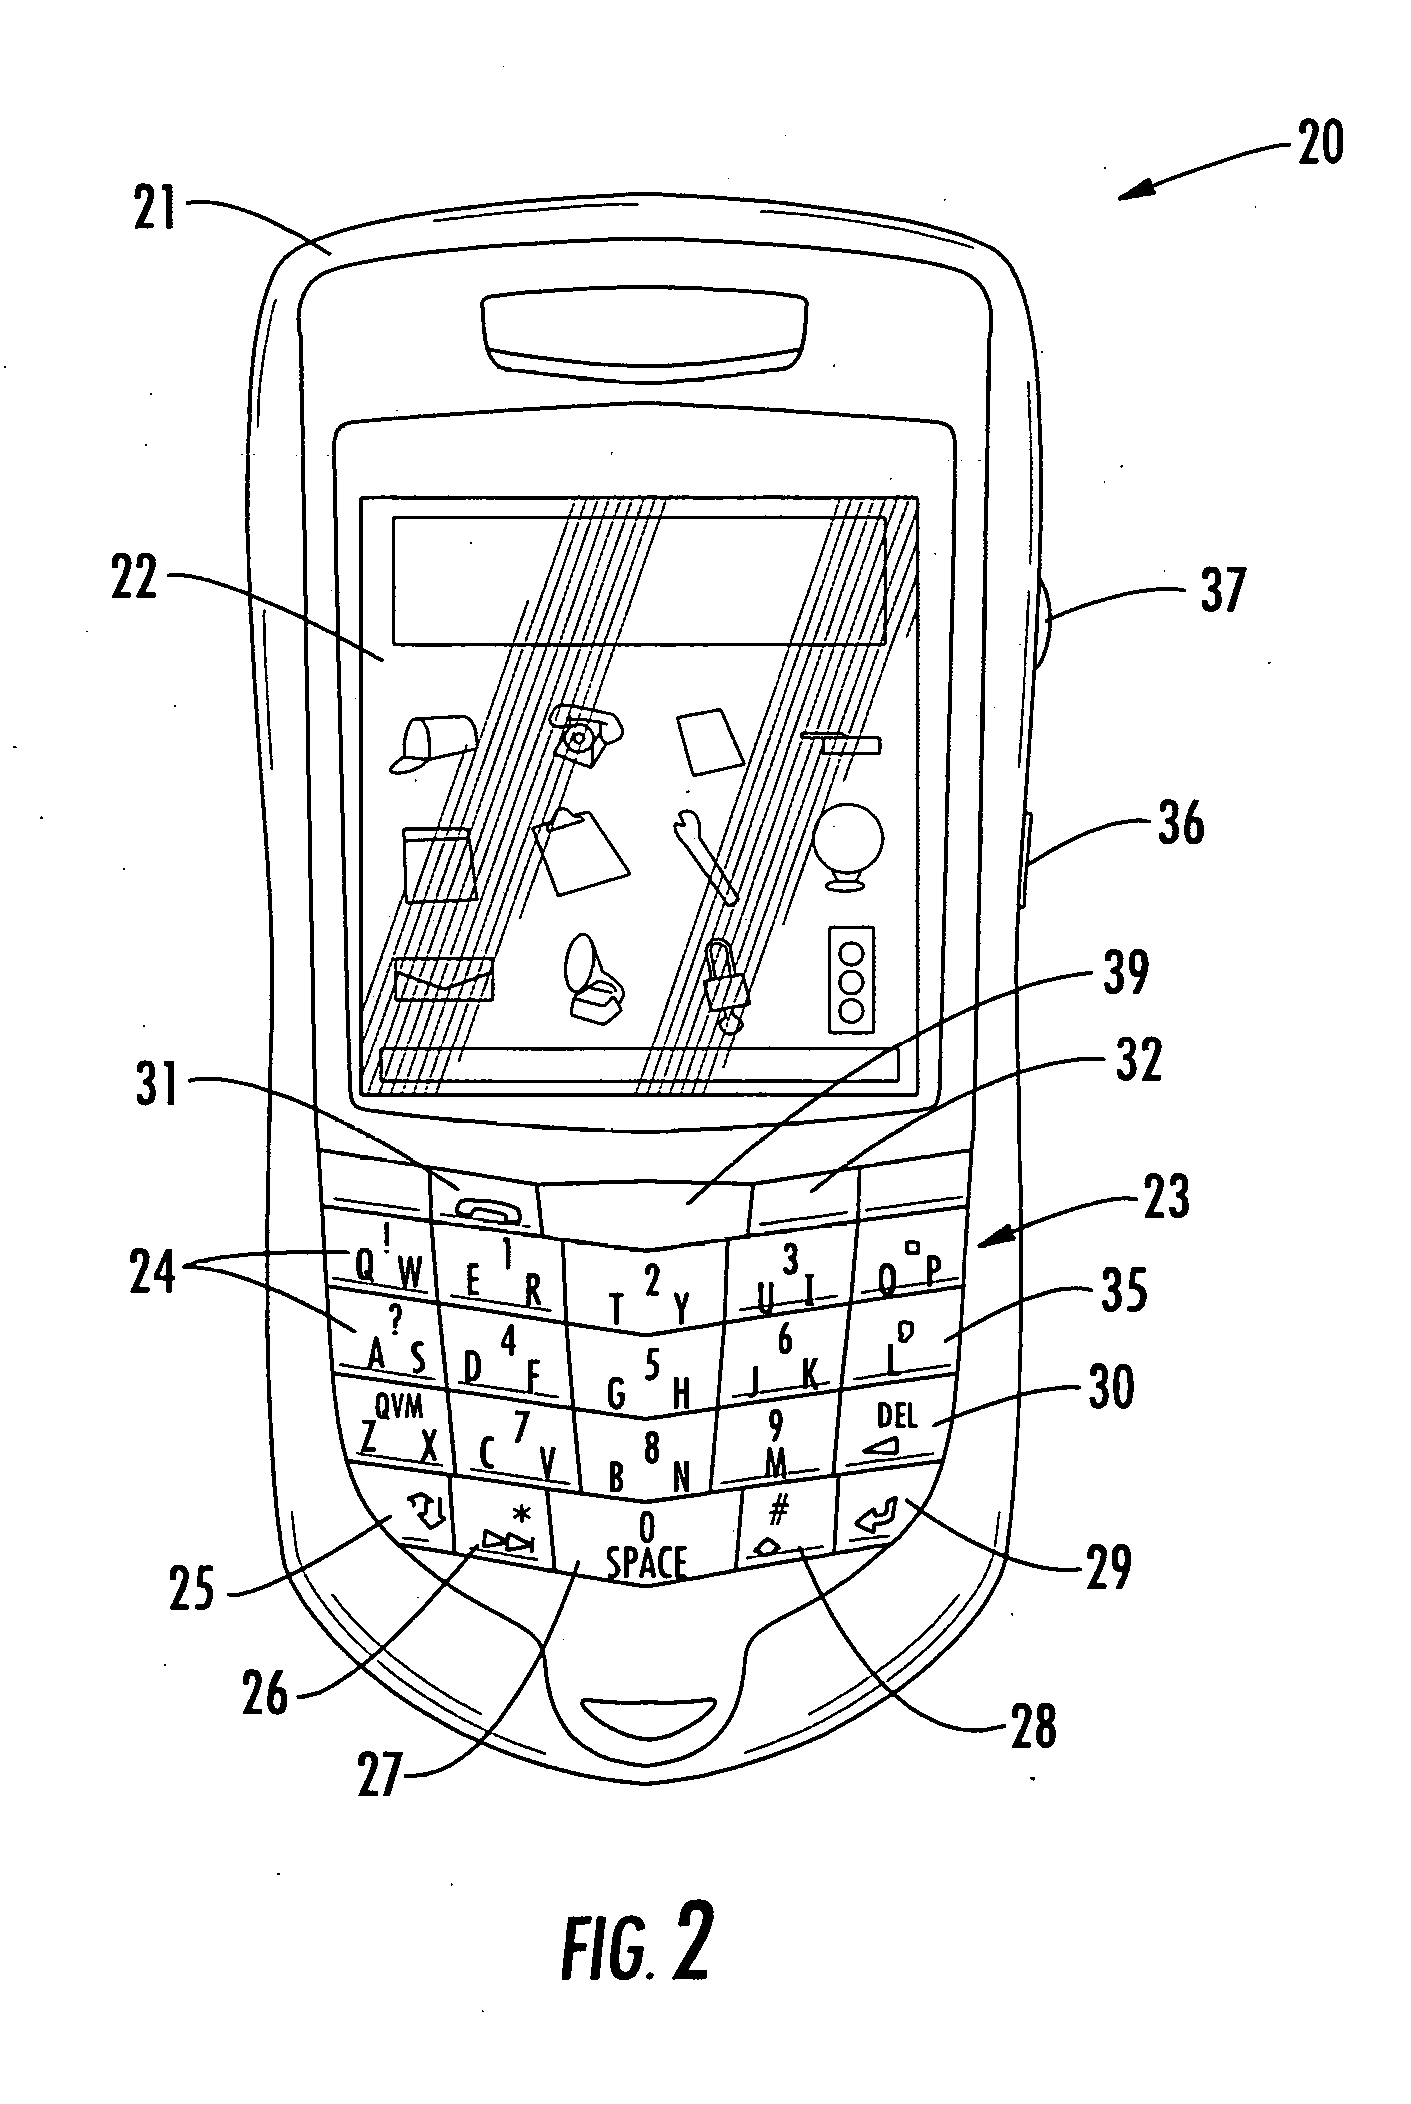 Mobile wireless communications device with reduced interference from the keyboard into the radio receiver